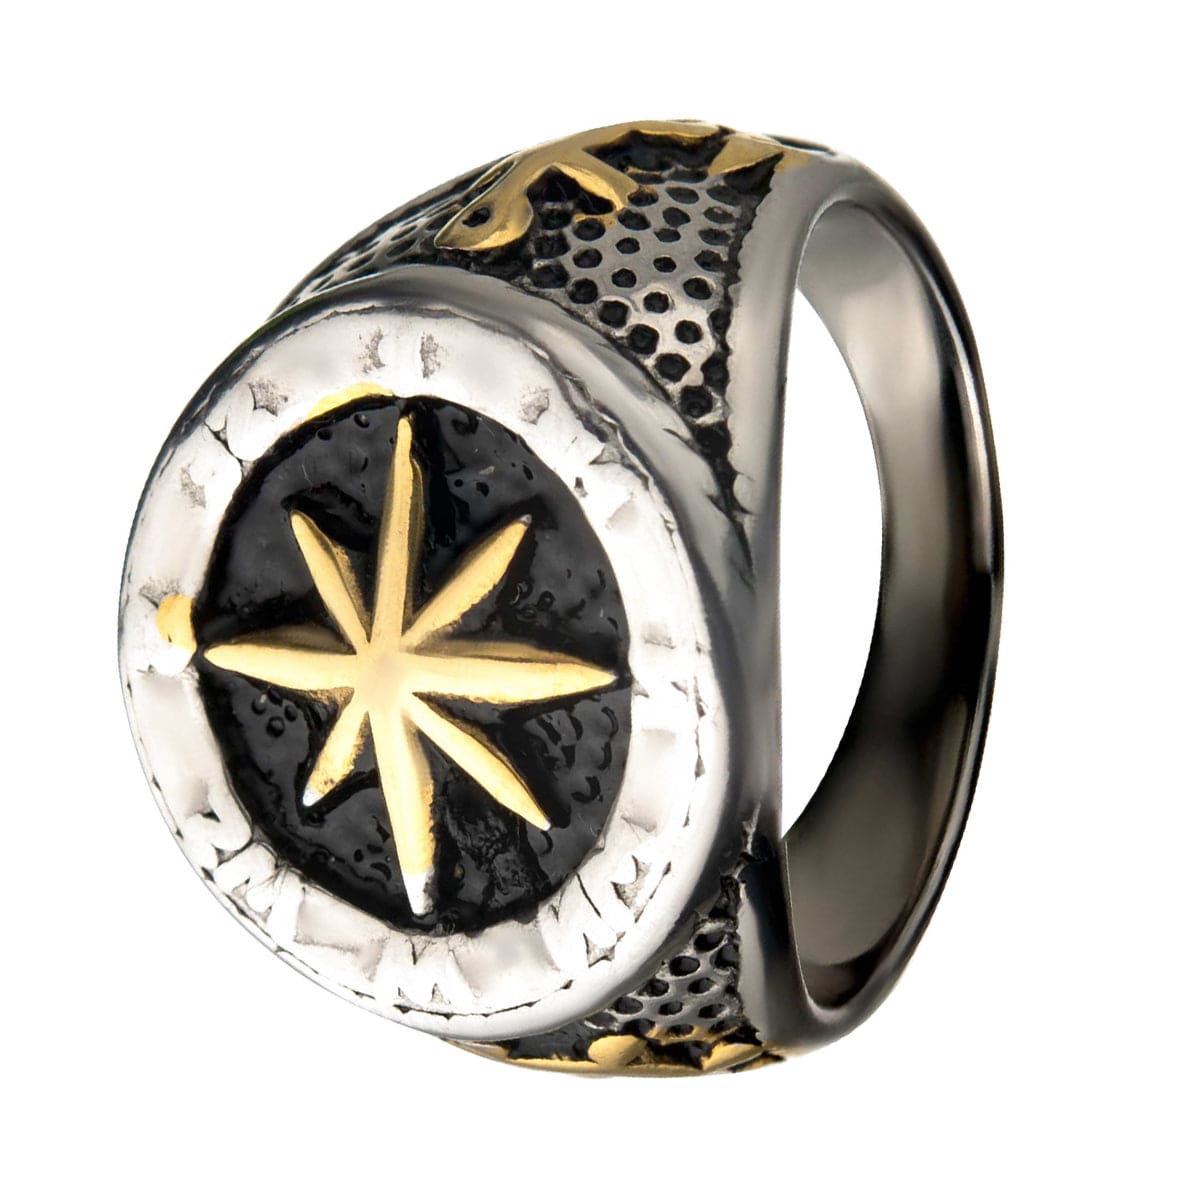 INOX JEWELRY Rings Golden Tone, Black and Antiqued Silver Tone Stainless Steel Vintage Anchor with Compass Signet Ring